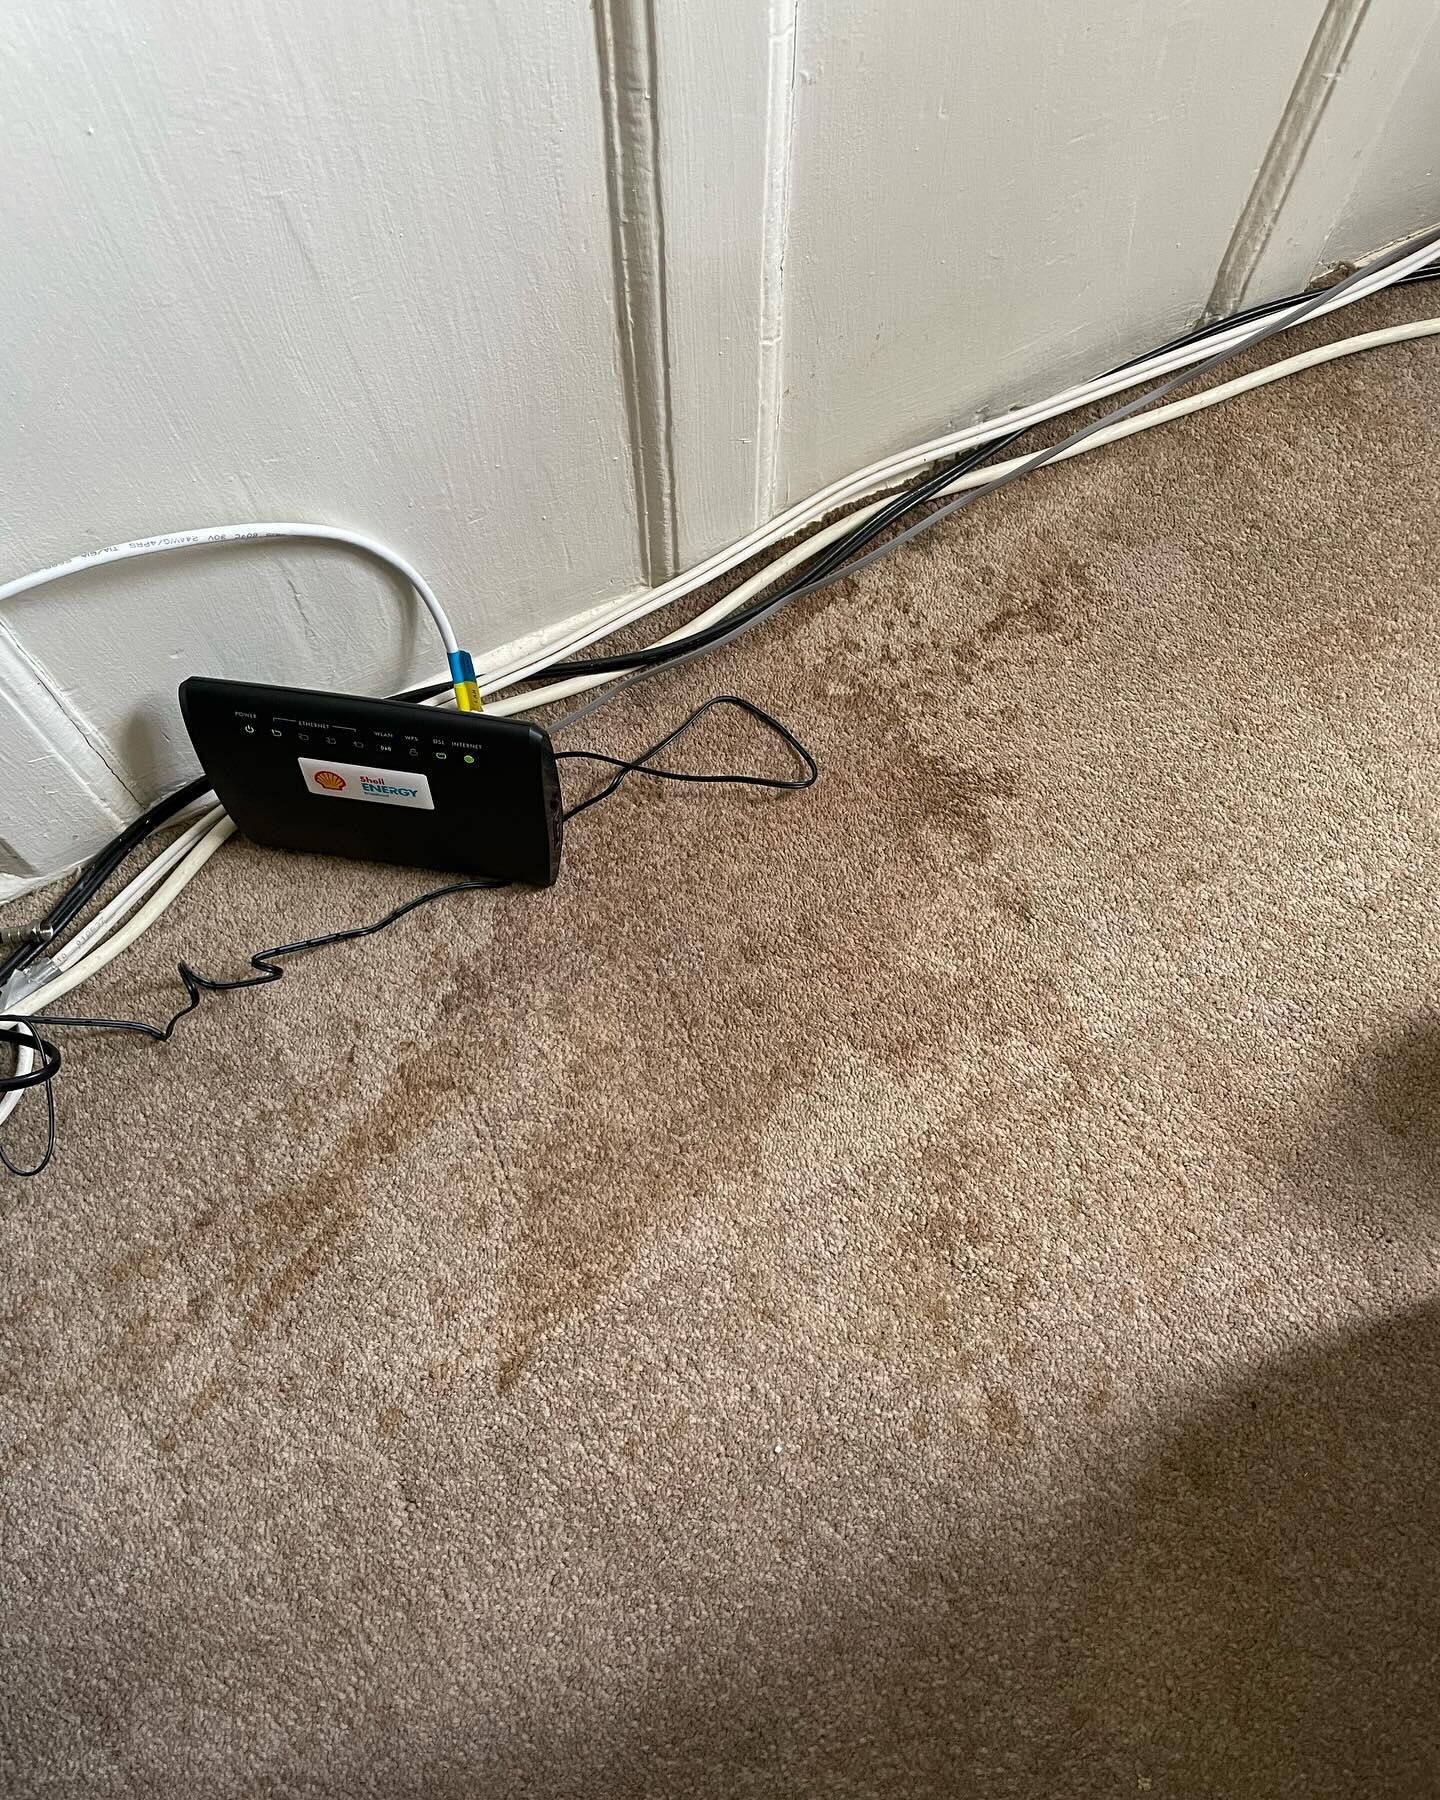 𝐂𝐨𝐟𝐟𝐞𝐞/𝐓𝐞𝐚 𝐬𝐭𝐚𝐢𝐧 𝐫𝐞𝐦𝐨𝐯𝐚𝐥 ⁣
⁣
Our technicians did a great job of removing this coffee/tea stain from behind a sofa 😄🏆
⁣
Carpet &amp; Upholstery cleaning starting from just &pound;30 🌟⁣
⁣
📅 BOOK TODAY!!!⁣⁣
⁣⁣
📞 01233 878070⁣⁣
